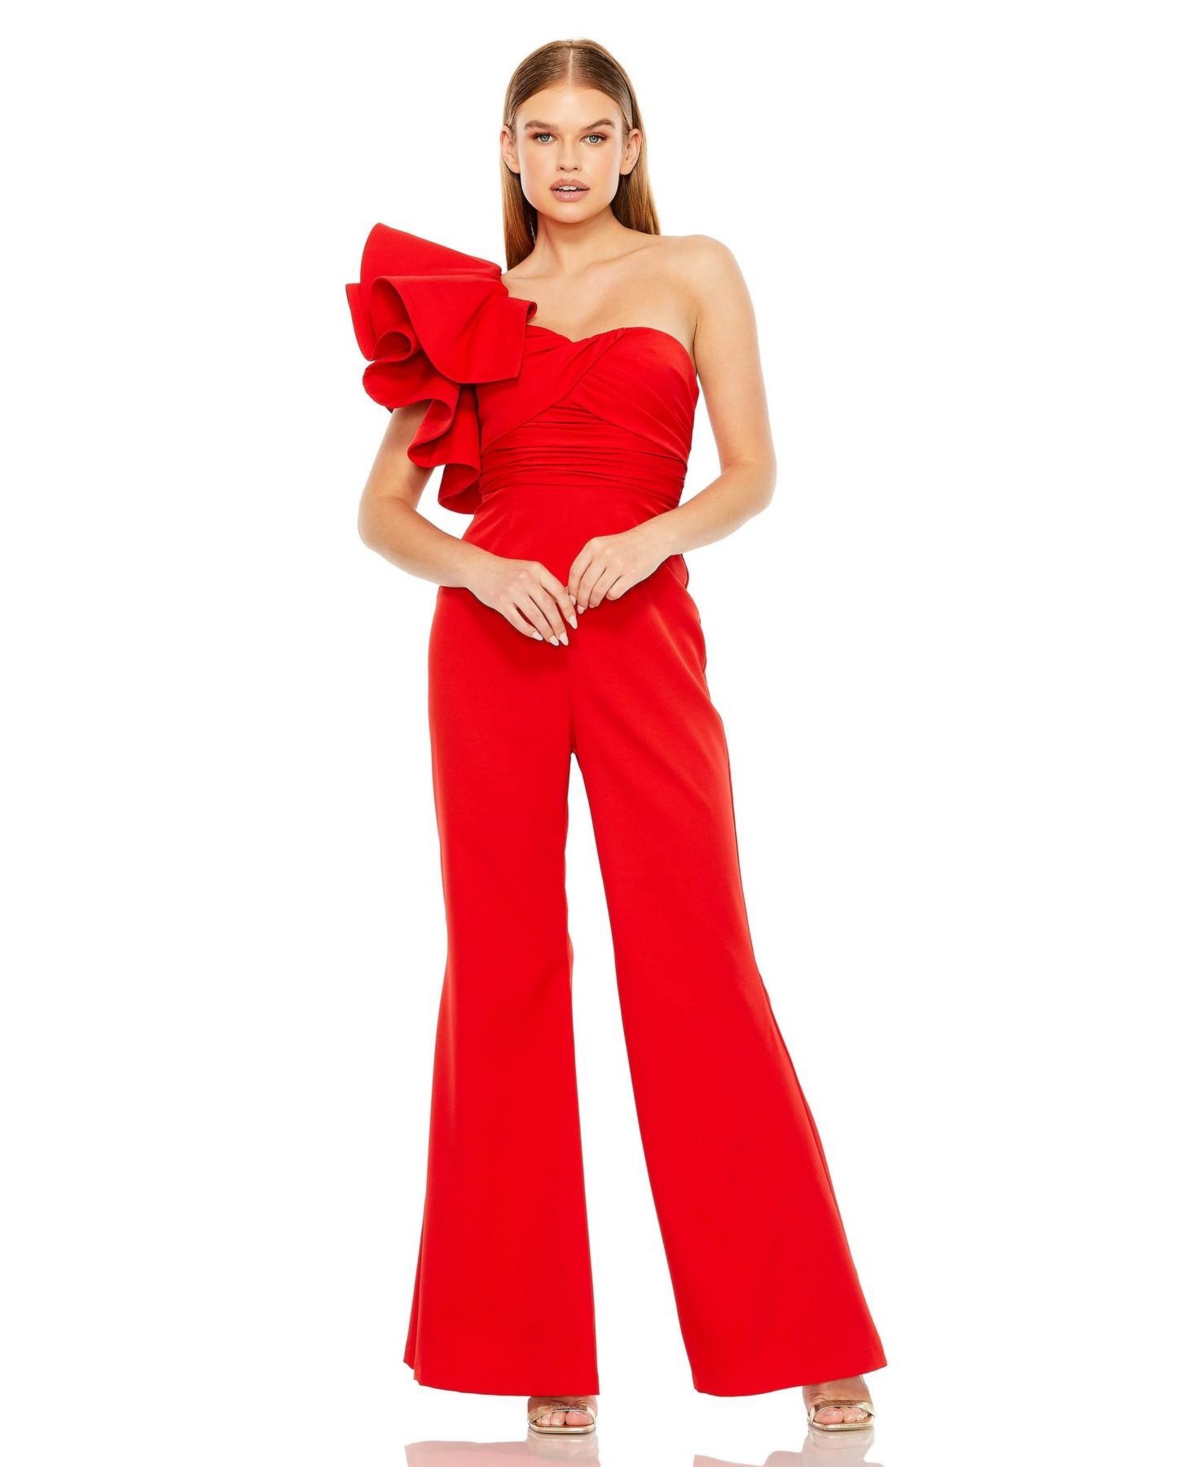 Women's One Shoulder Ruffle Detail Flare Pant Jumpsuit - Red